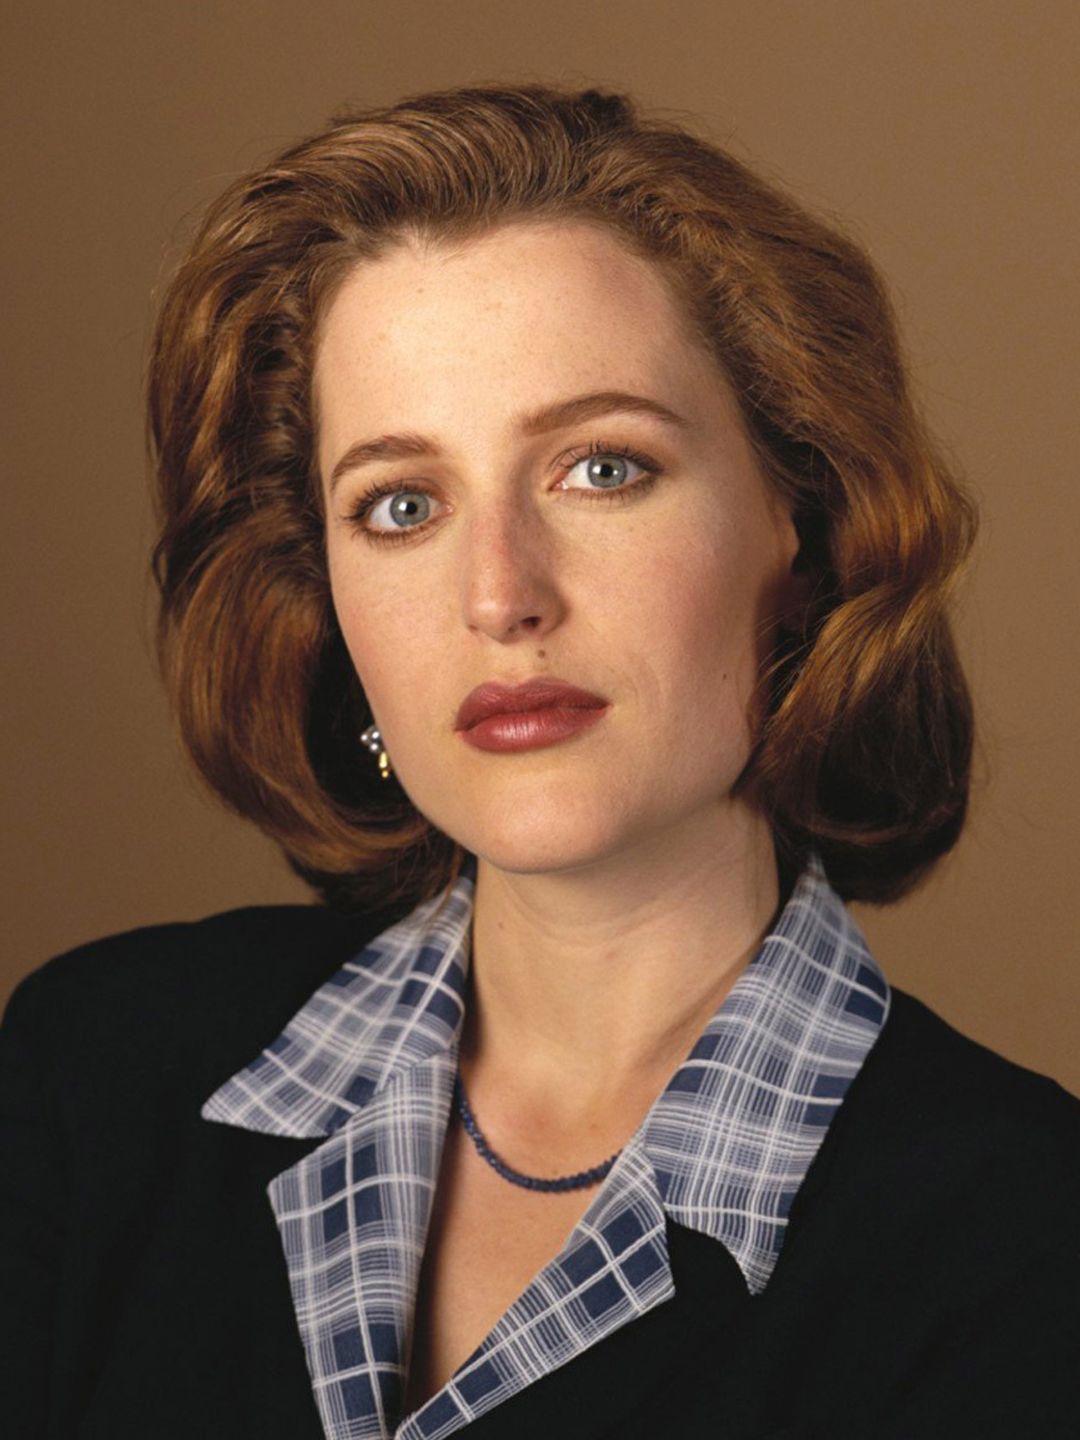 Gillian Anderson in her youth